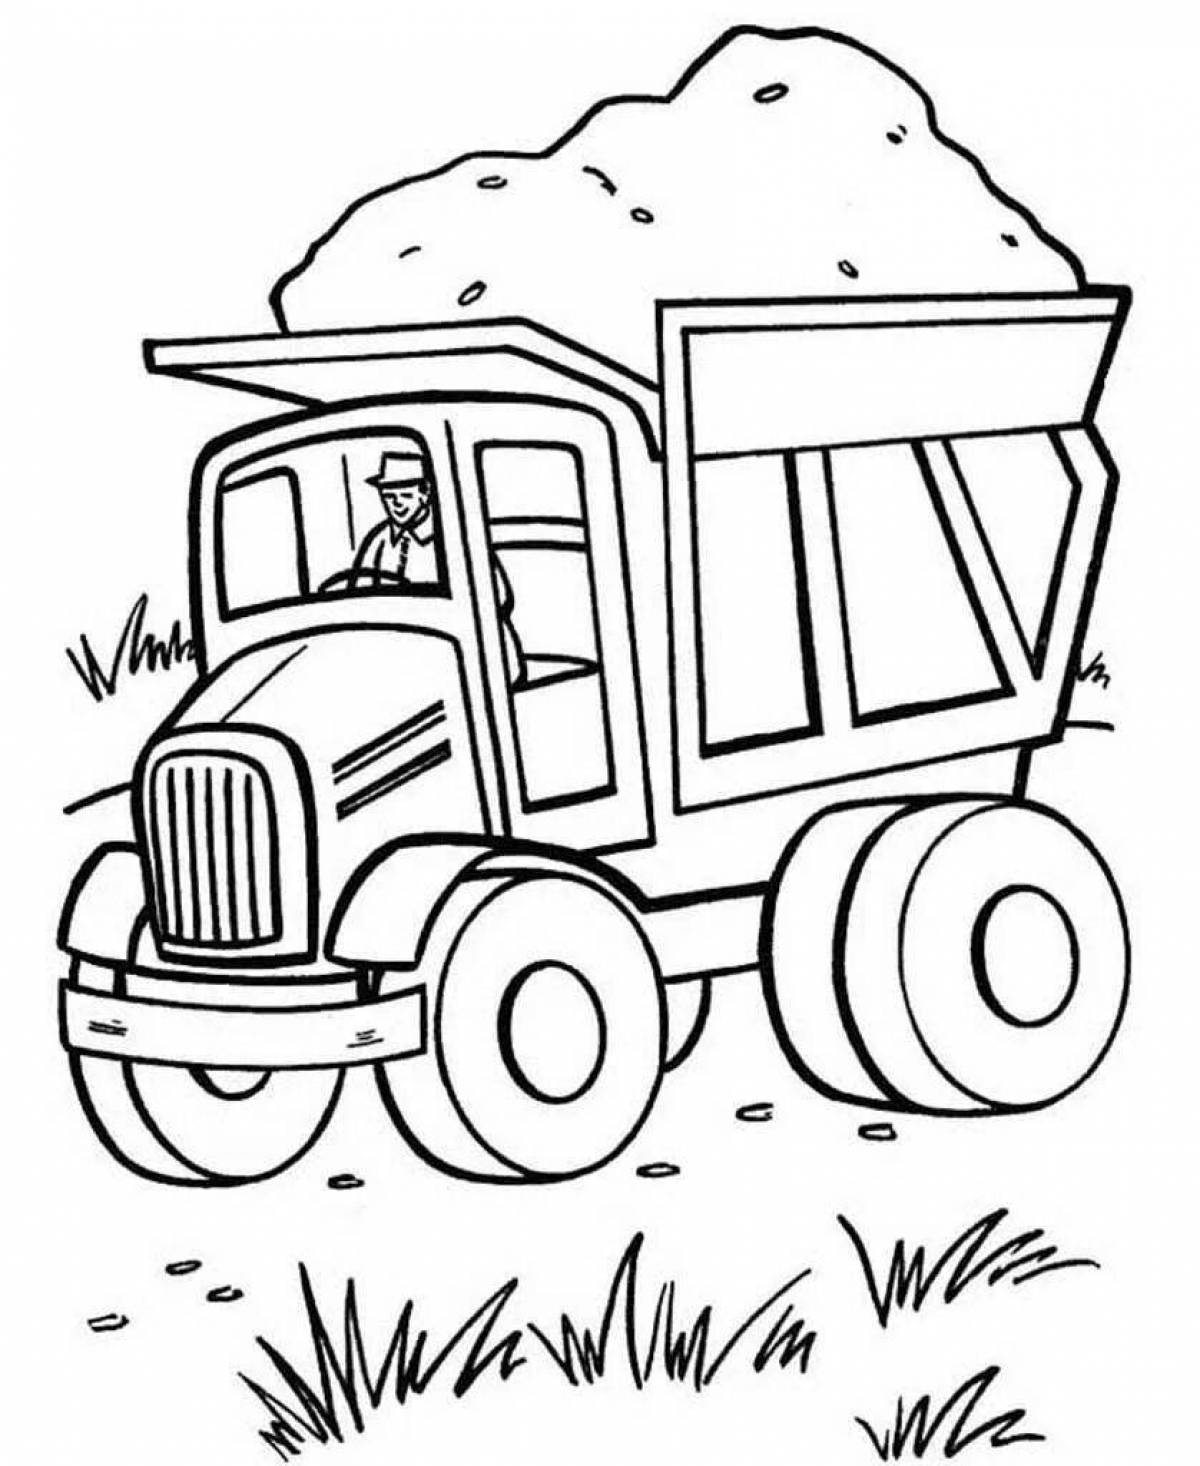 Animated truck coloring page for kids